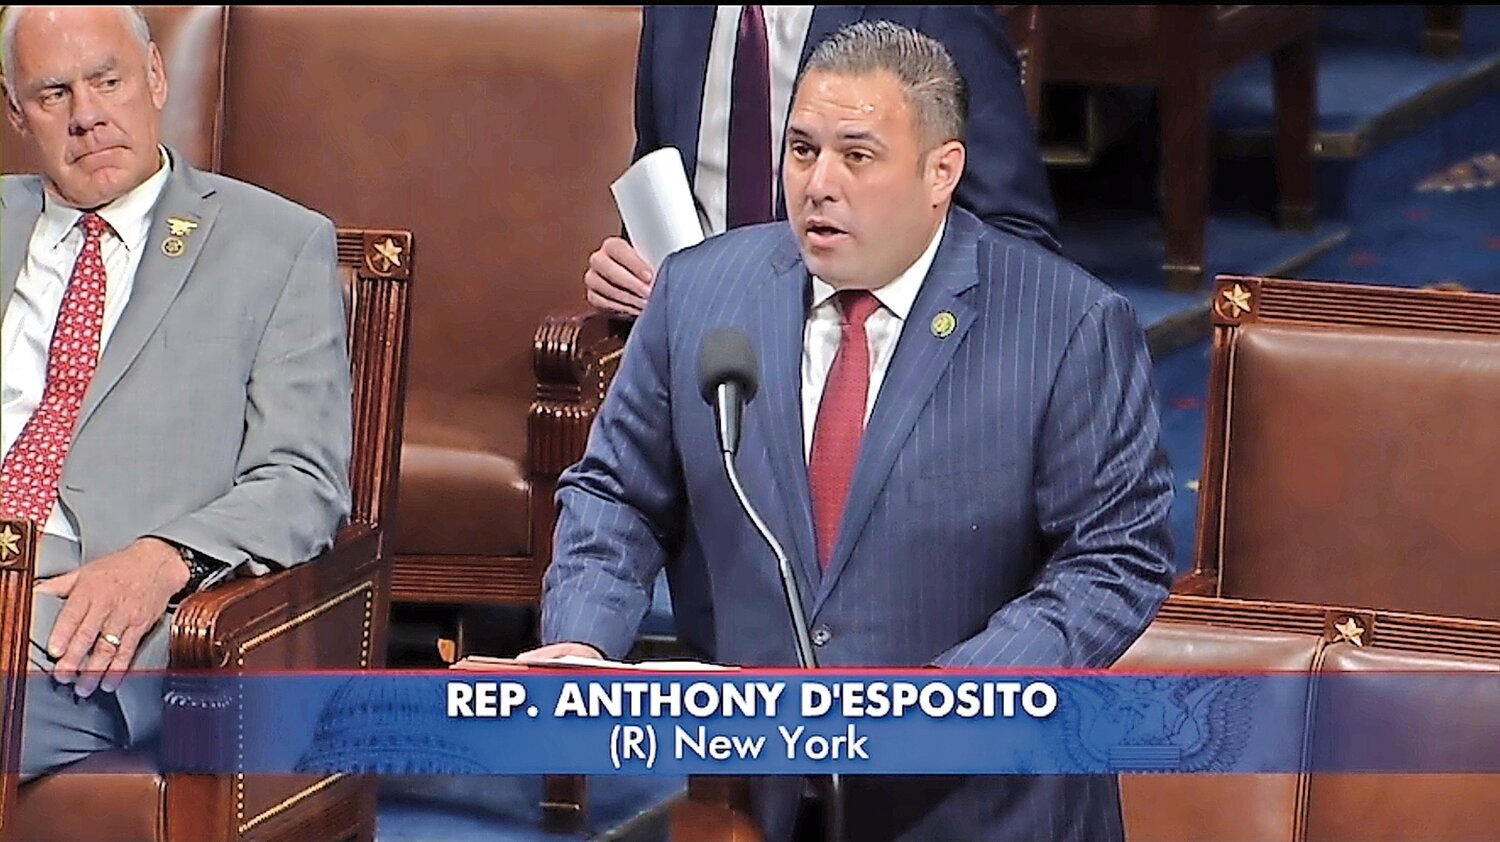 U.S. Rep. Anthony D’Esposito passed a motion in the House of Representatives on May 17 to send the case of his Long Island colleague, Rep. George Santos, to the House Ethics Committee. A resolution to expel Santos was recently introduced by a Democratic House member from California, Robert Garcia.